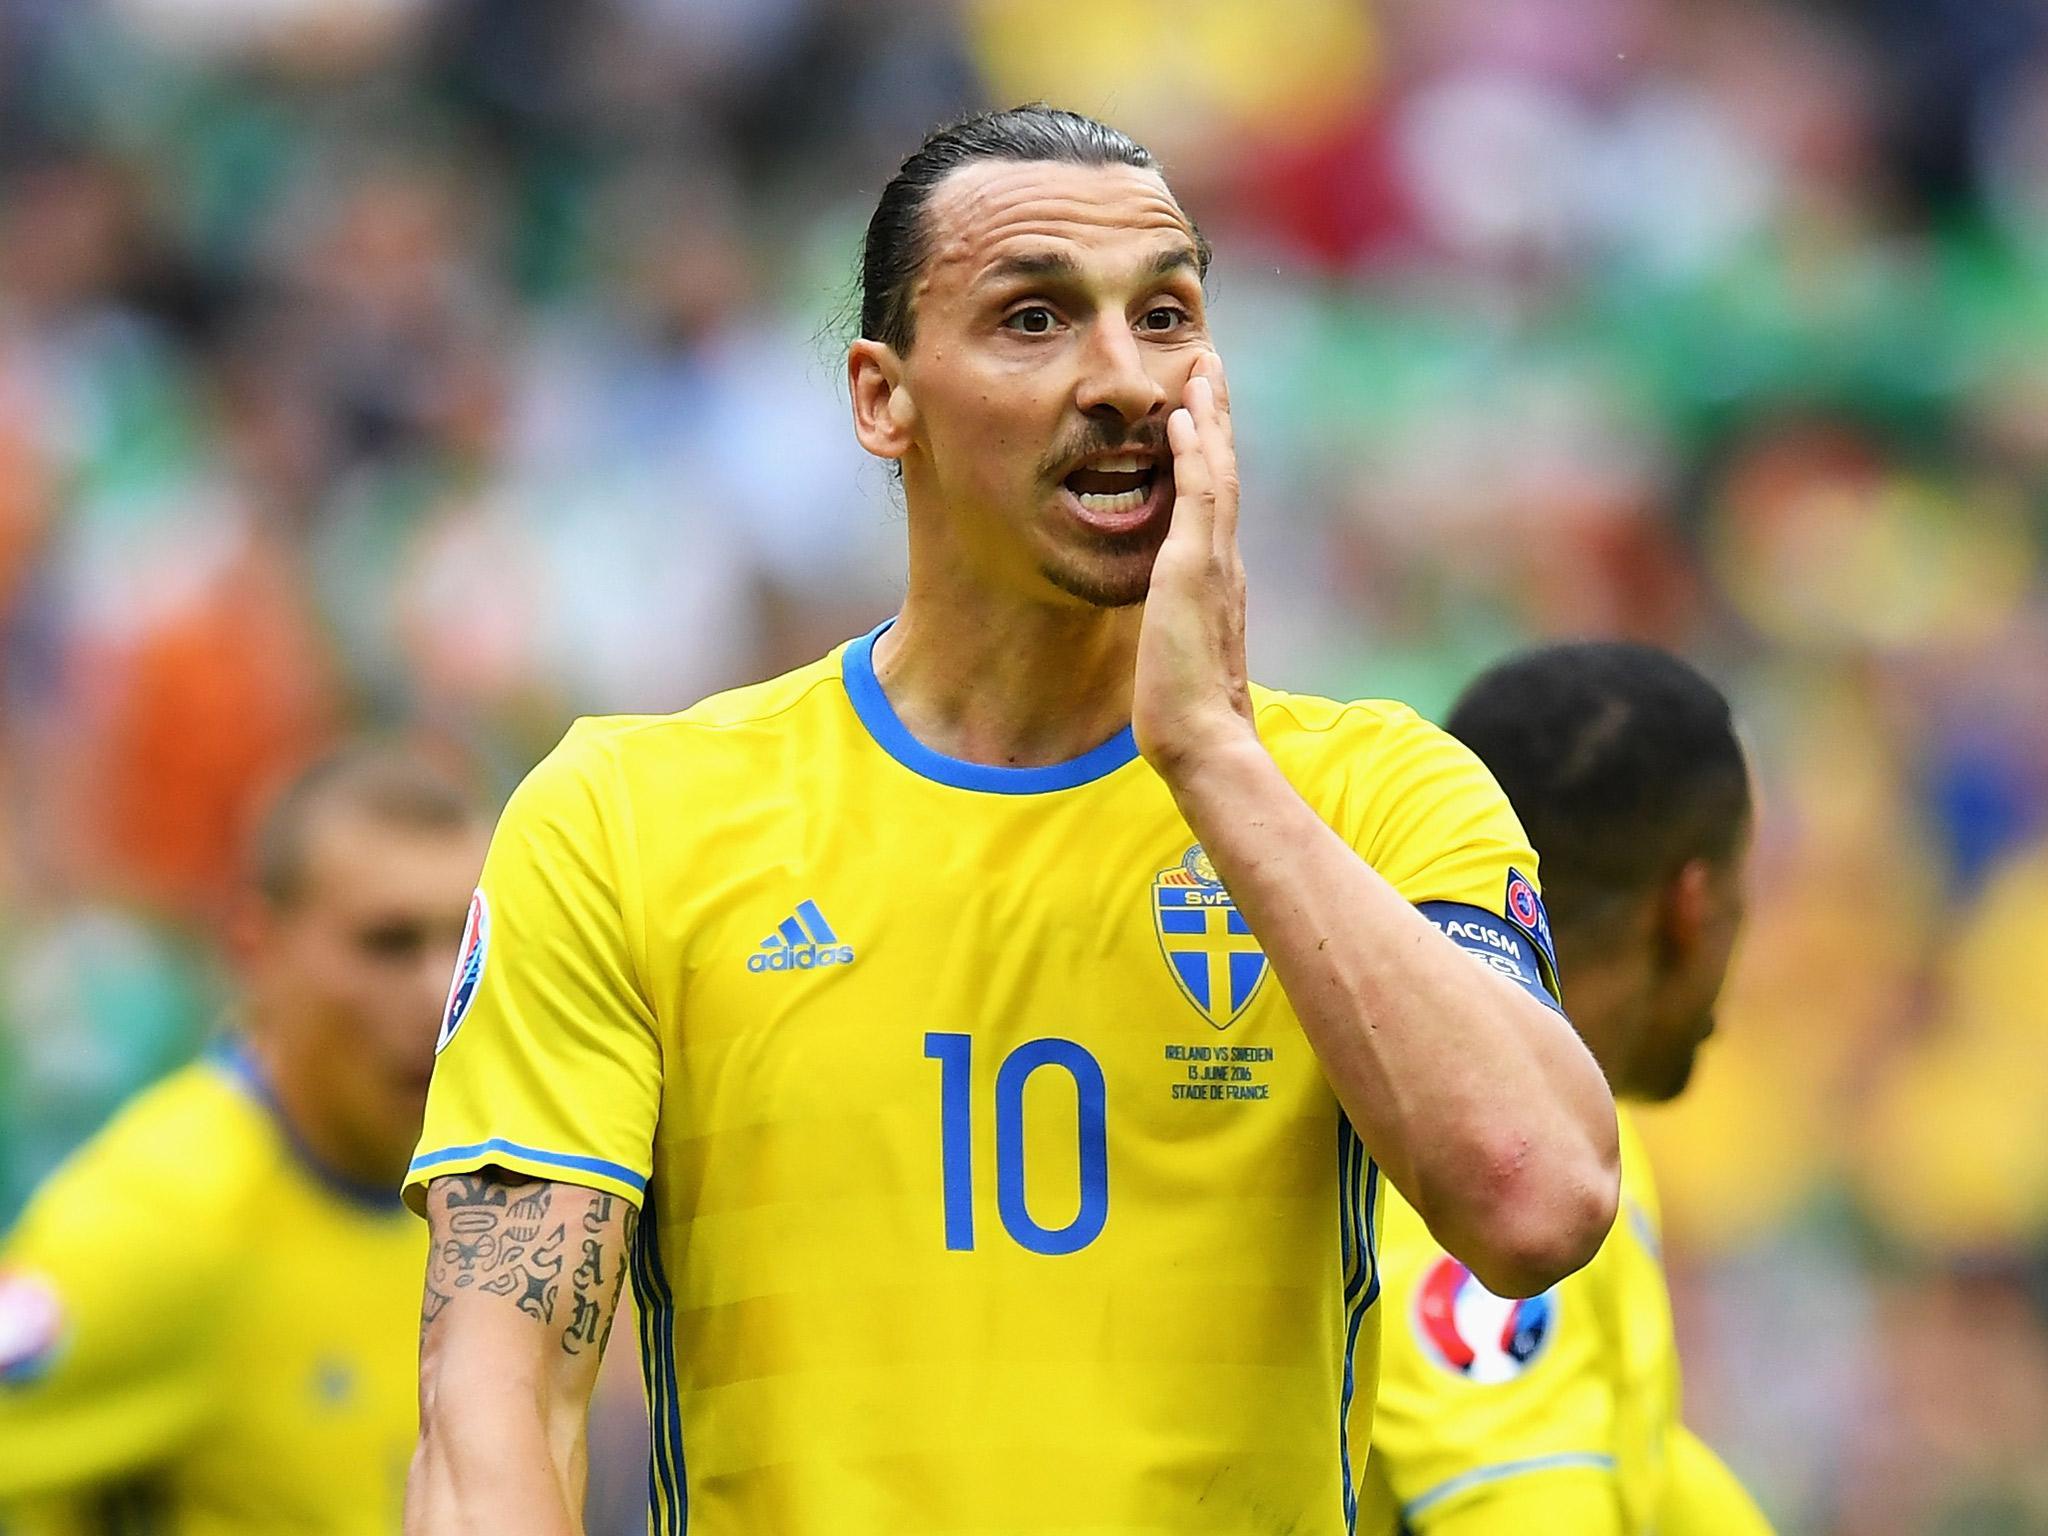 Ibrahimovic has retired from international football after Sweden's Euro 2016 exit